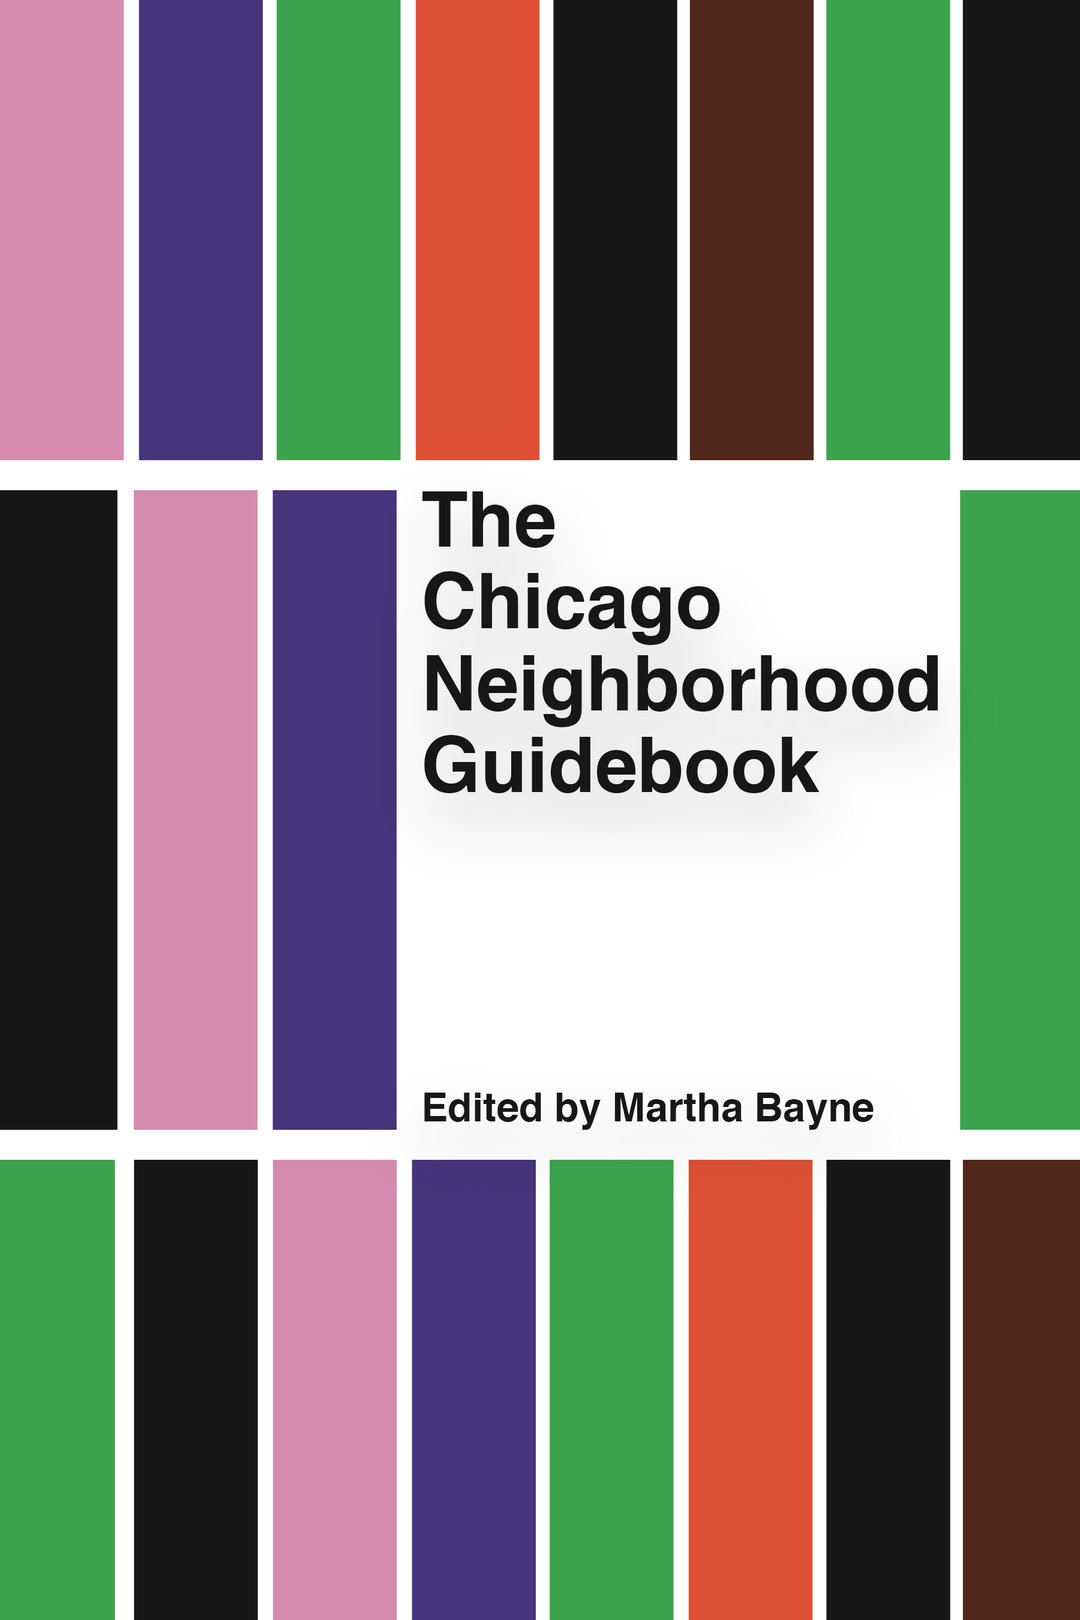 An image of the book cover. It has stripes that resemble the L stop train line colors and bold text with the title.